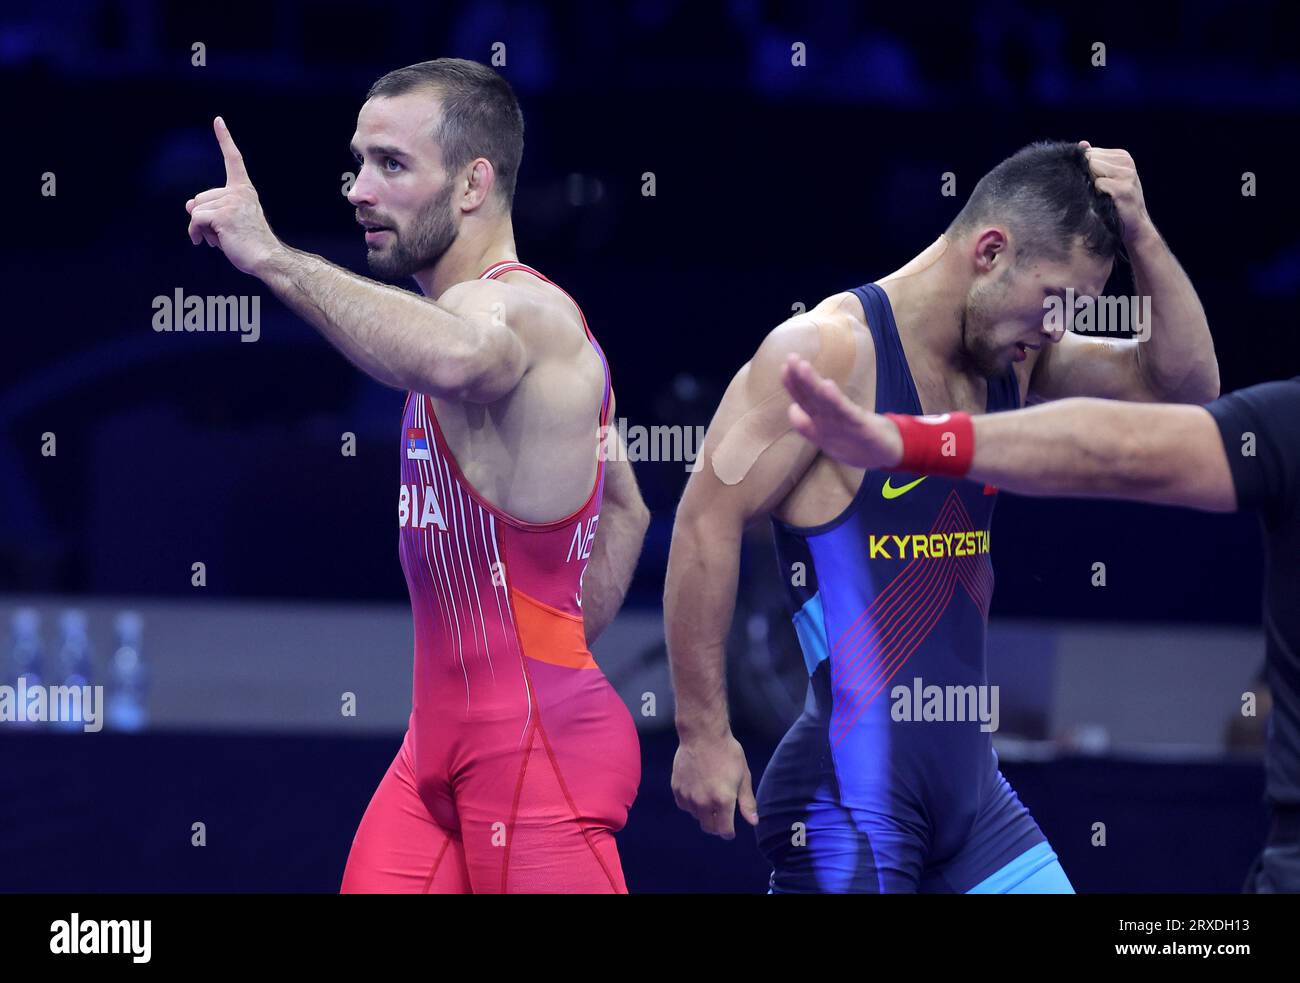 Belgrade. 24th Sep, 2023. Serbia's Mate Nemes (L) celebrate victory after defeating Kyrgyzstan's Amantur Ismailov after their match for bronze medal in the men's 67kg Greco-Roman category at the Wrestling World Championships in Belgrade, Serbia on Sept. 24, 2023. Credit: Predrag Milosavljevic/Xinhua/Alamy Live News Stock Photo